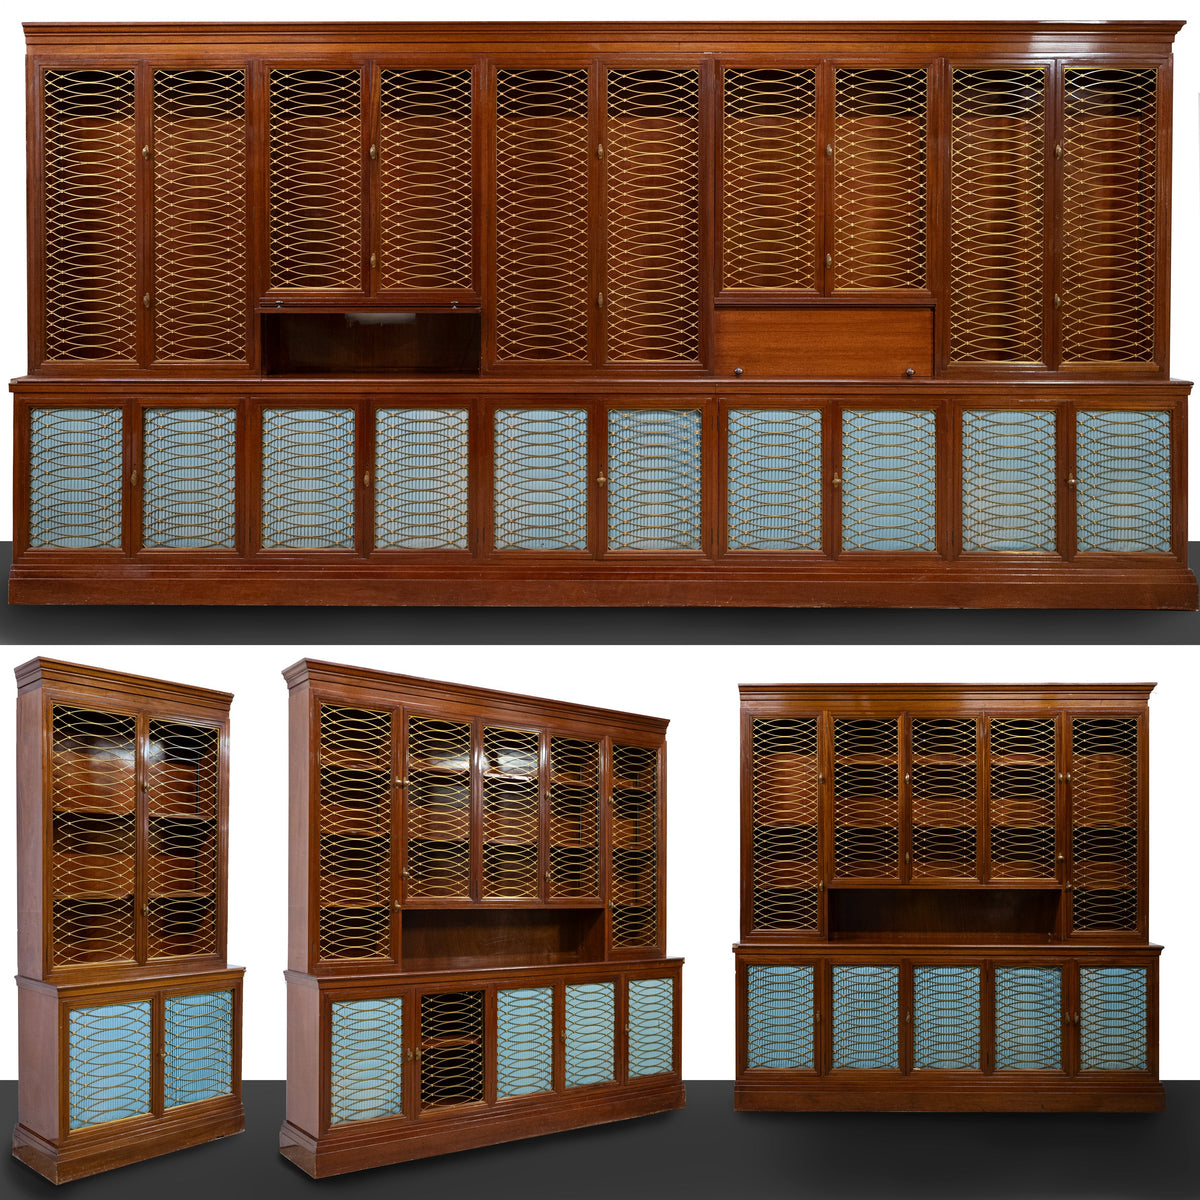 Regency Style Library Room Cabinetry| Reclaimed from Clothworkers&#39; Hall London | The Architectural Forum